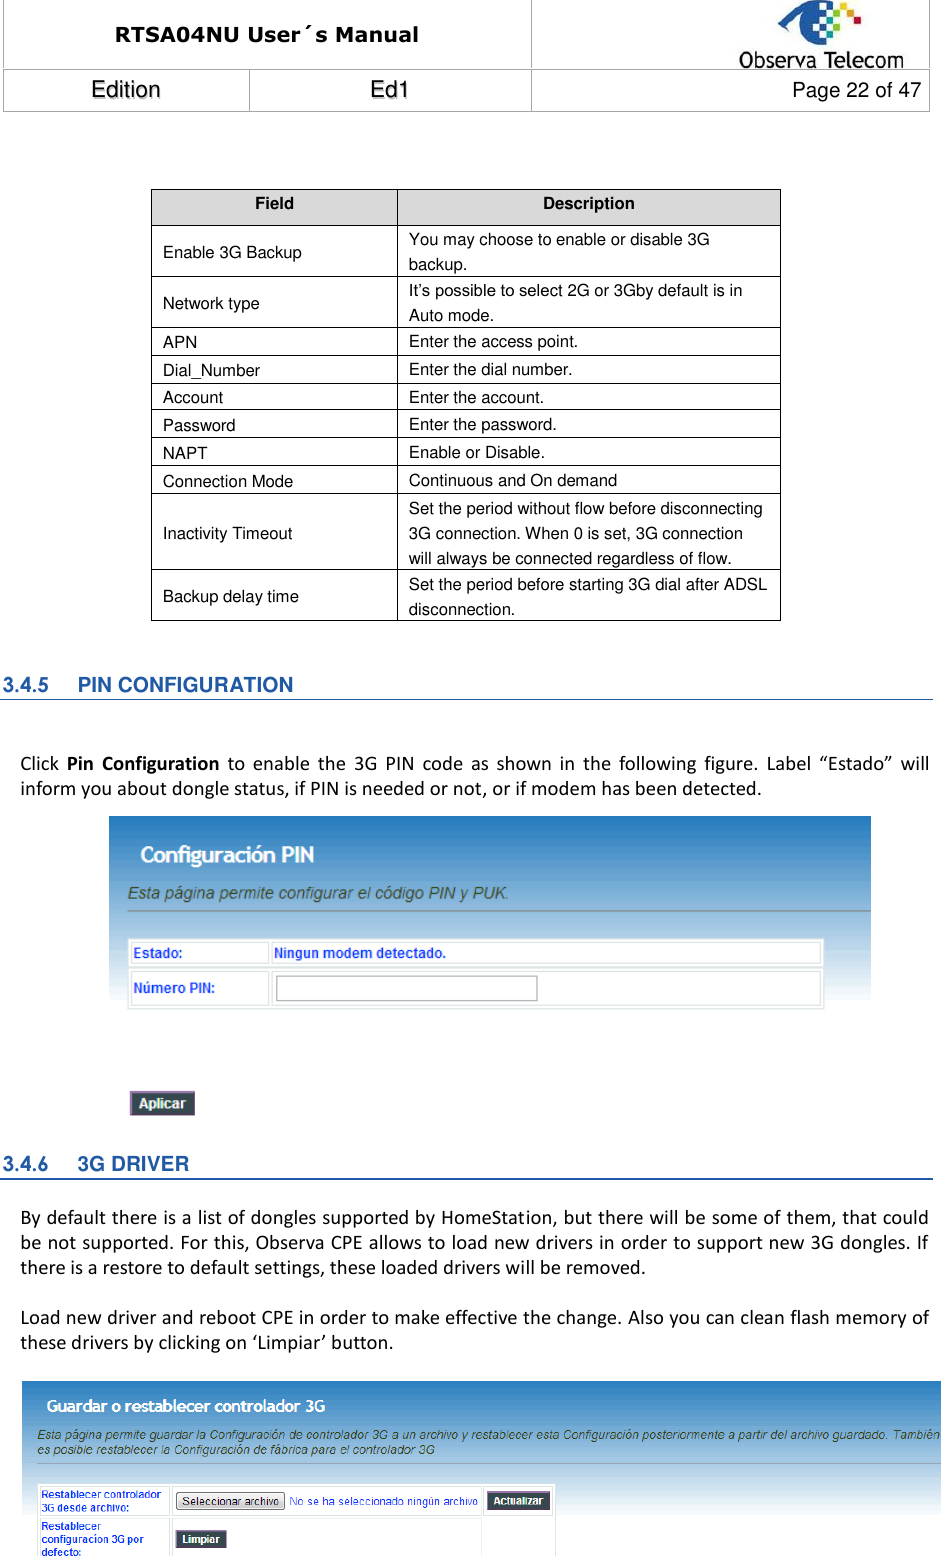 RTSA04NU User´s Manual  EEddiittiioonn  EEdd11  Page 22 of 47    Field Description Enable 3G Backup You may choose to enable or disable 3G backup. Network type It’s possible to select 2G or 3Gby default is in Auto mode. APN Enter the access point. Dial_Number Enter the dial number. Account Enter the account. Password Enter the password. NAPT Enable or Disable. Connection Mode Continuous and On demand Inactivity Timeout Set the period without flow before disconnecting 3G connection. When 0 is set, 3G connection will always be connected regardless of flow.  Backup delay time Set the period before starting 3G dial after ADSL disconnection.  3.4.5  PIN CONFIGURATION  Click  Pin  Configuration  to  enable  the  3G  PIN  code  as  shown  in  the  following  figure. Label  “Estado”  will inform you about dongle status, if PIN is needed or not, or if modem has been detected.              3.4.6  3G DRIVER By default there is a list of dongles supported by HomeStation, but there will be some of them, that could be not supported. For this, Observa CPE allows to load new drivers in order to support new 3G dongles. If there is a restore to default settings, these loaded drivers will be removed.  Load new driver and reboot CPE in order to make effective the change. Also you can clean flash memory of these drivers by clicking on ‘Limpiar’ button.         